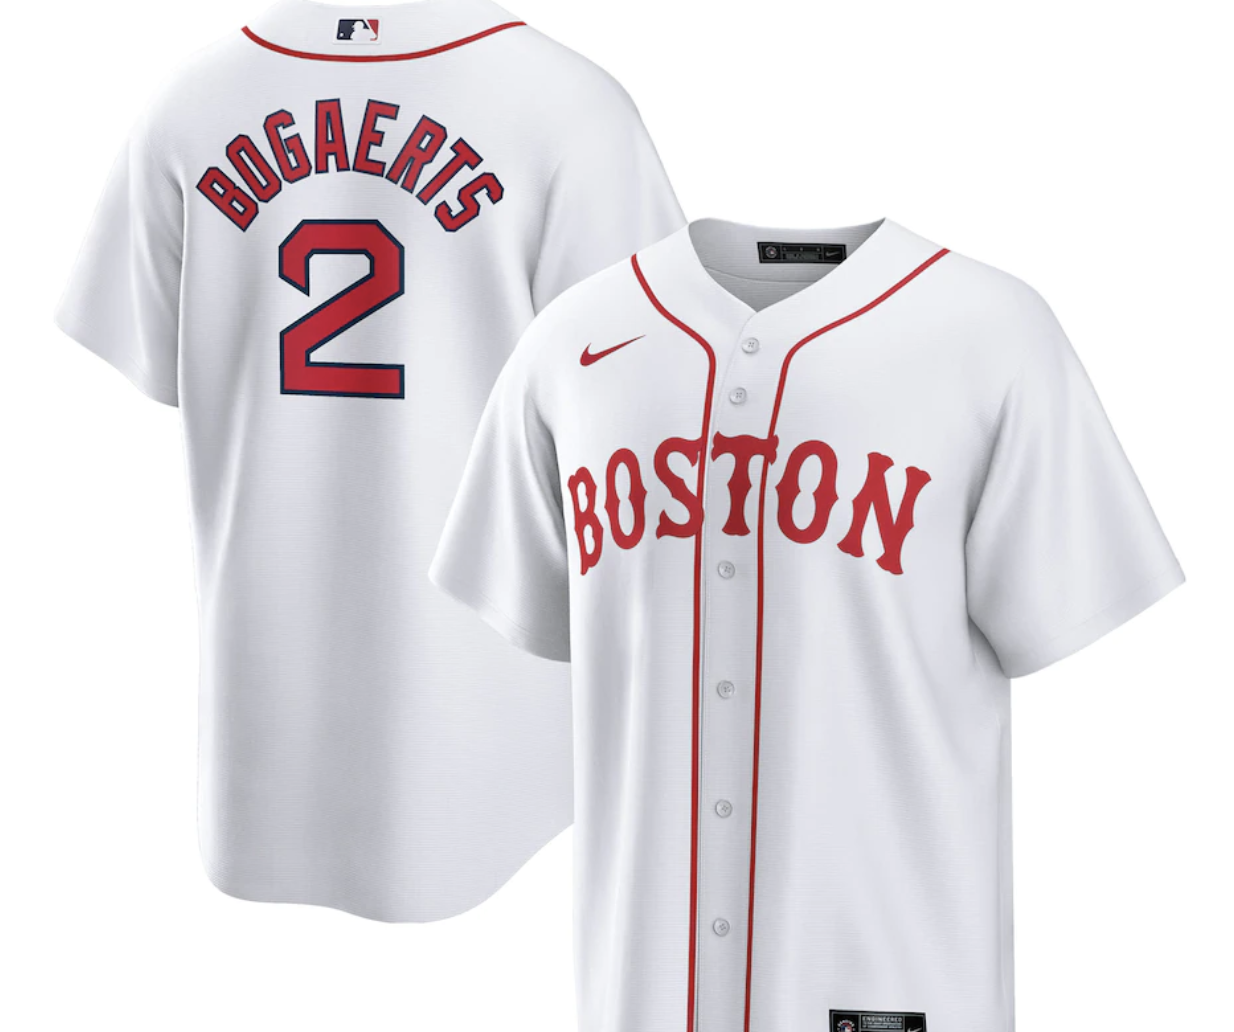 Boston Red Sox Nike Official Replica Home Jersey - Womens